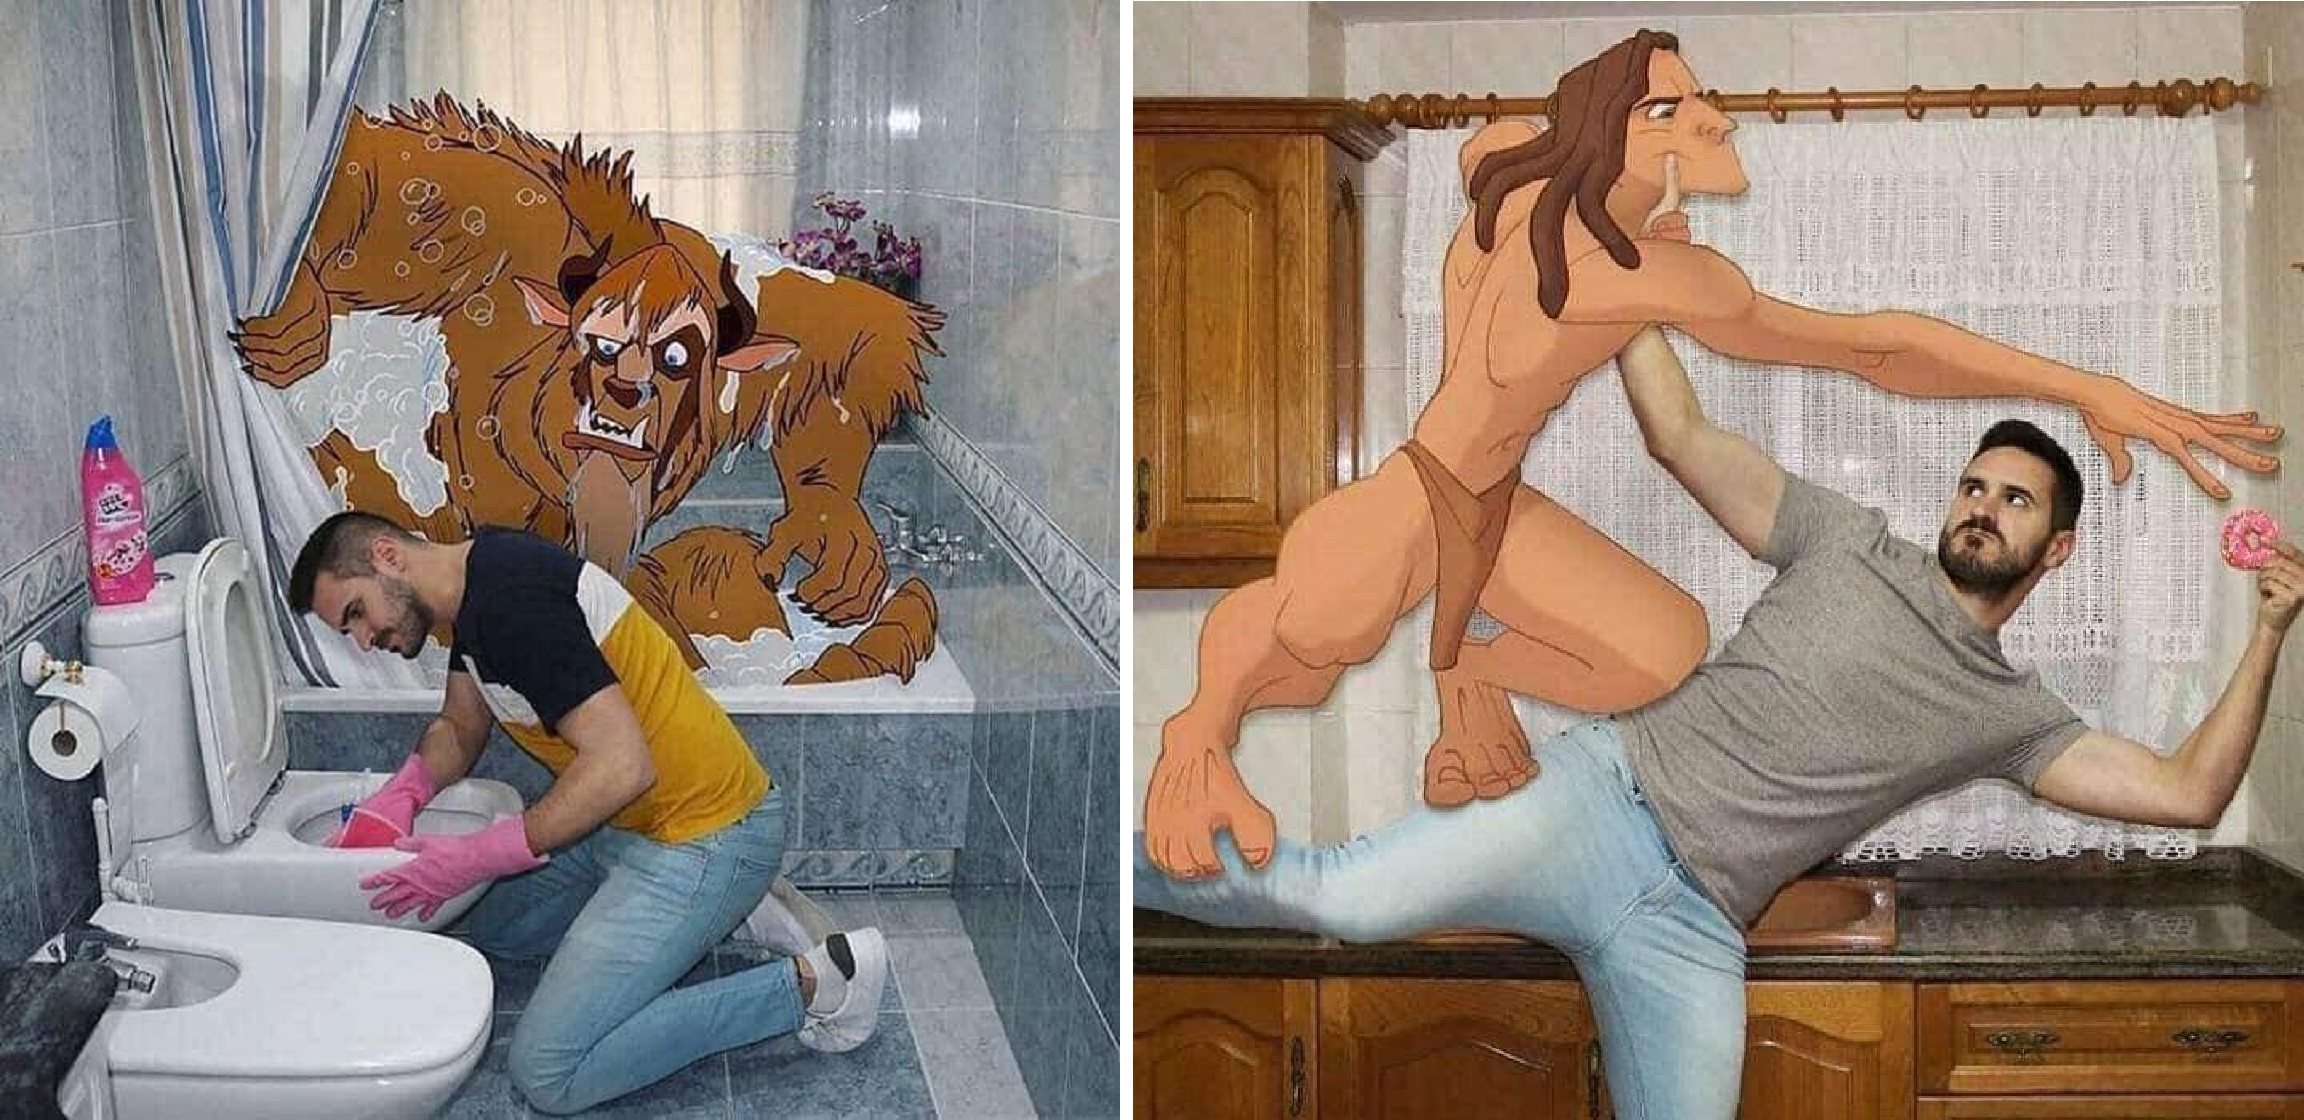 Artist Beautifully Merges Disney Characters Into His Everyday Life, And It Looks So Much Fun!